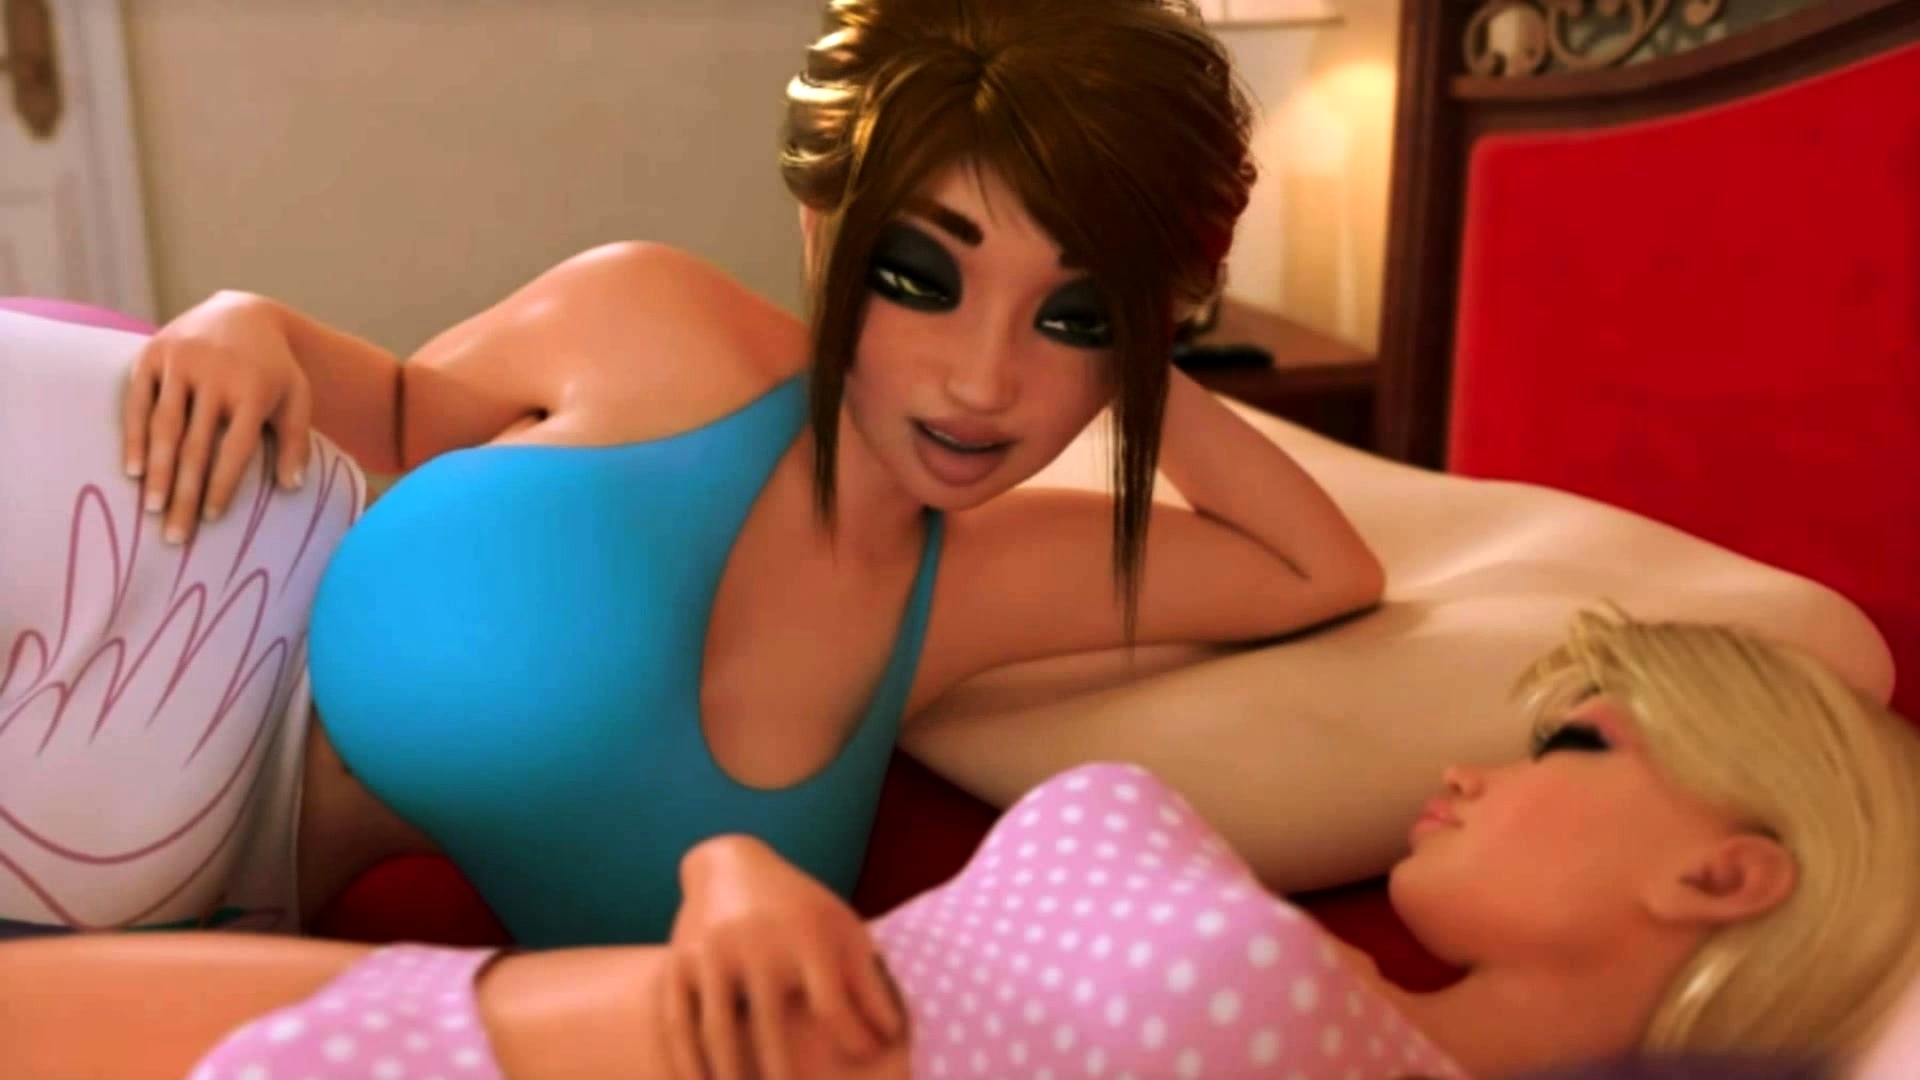 3d Animated Porn Moving Animations - Enjoy Free HD Porn Videos - Futa Mom And Daughters Movie Night - 3d  Animation Eng - - VivaTube.com